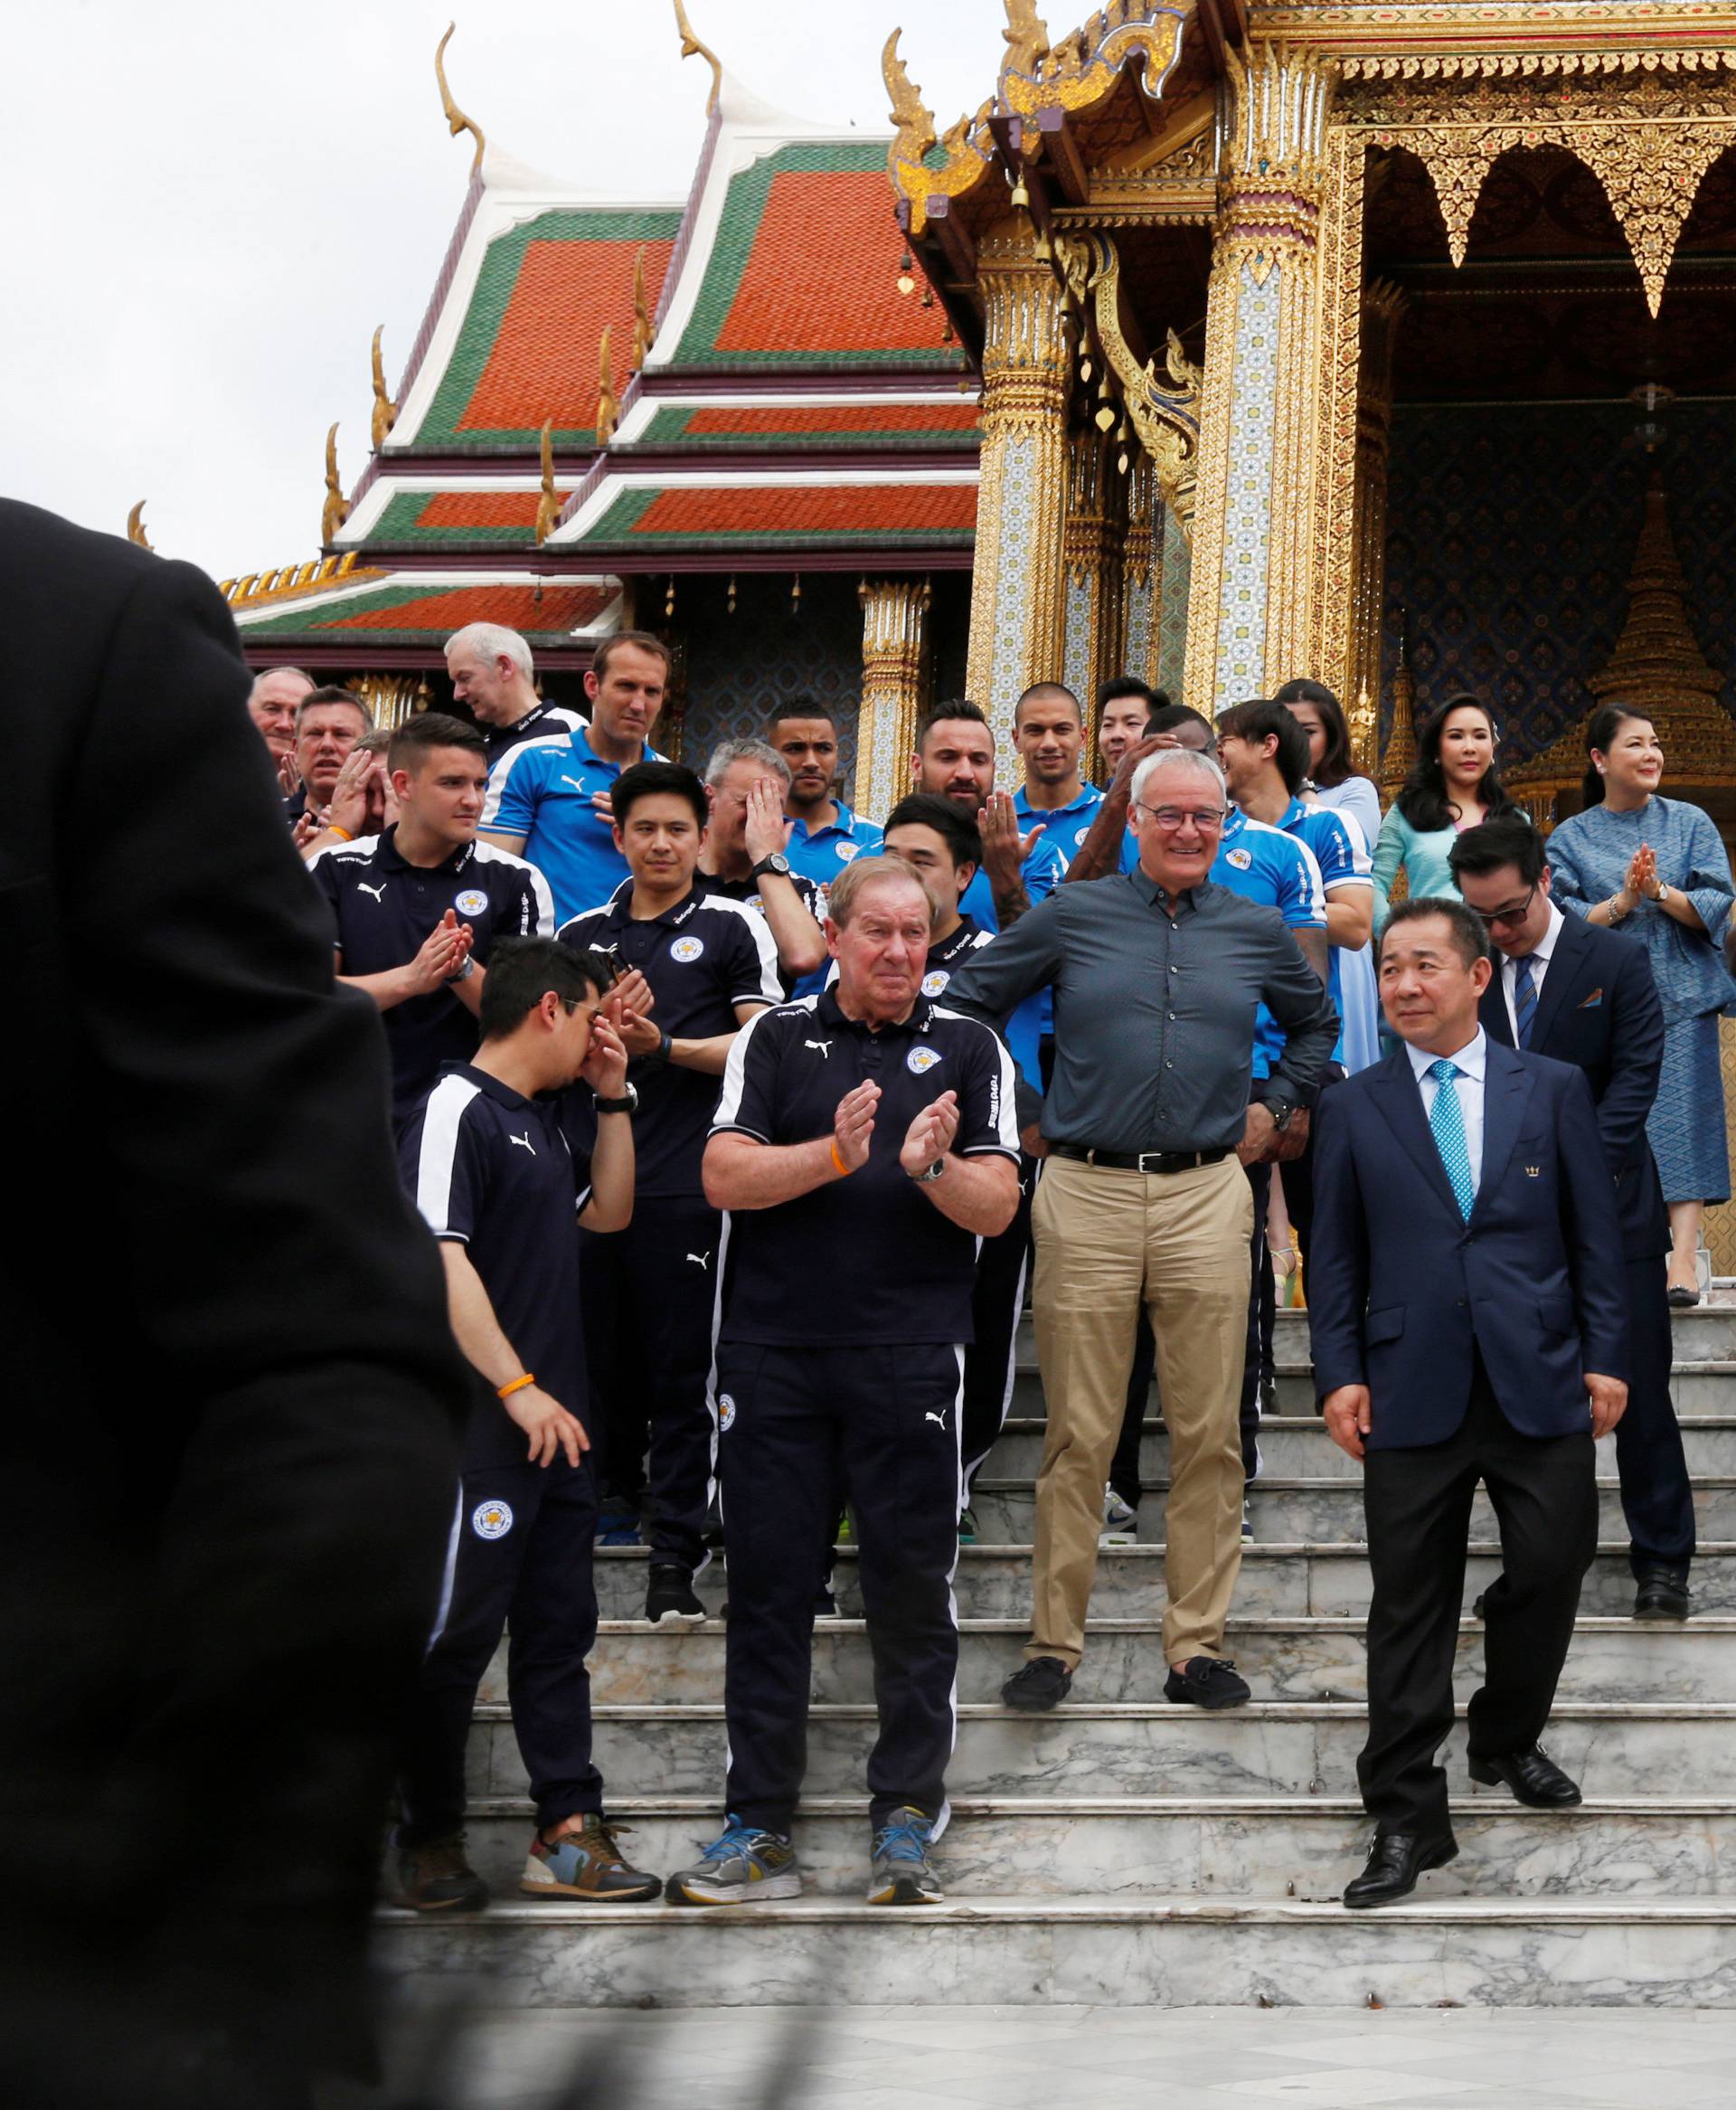 Leicester City soccer team poses for a while as they visit the Emerald Buddha temple in Bangkok